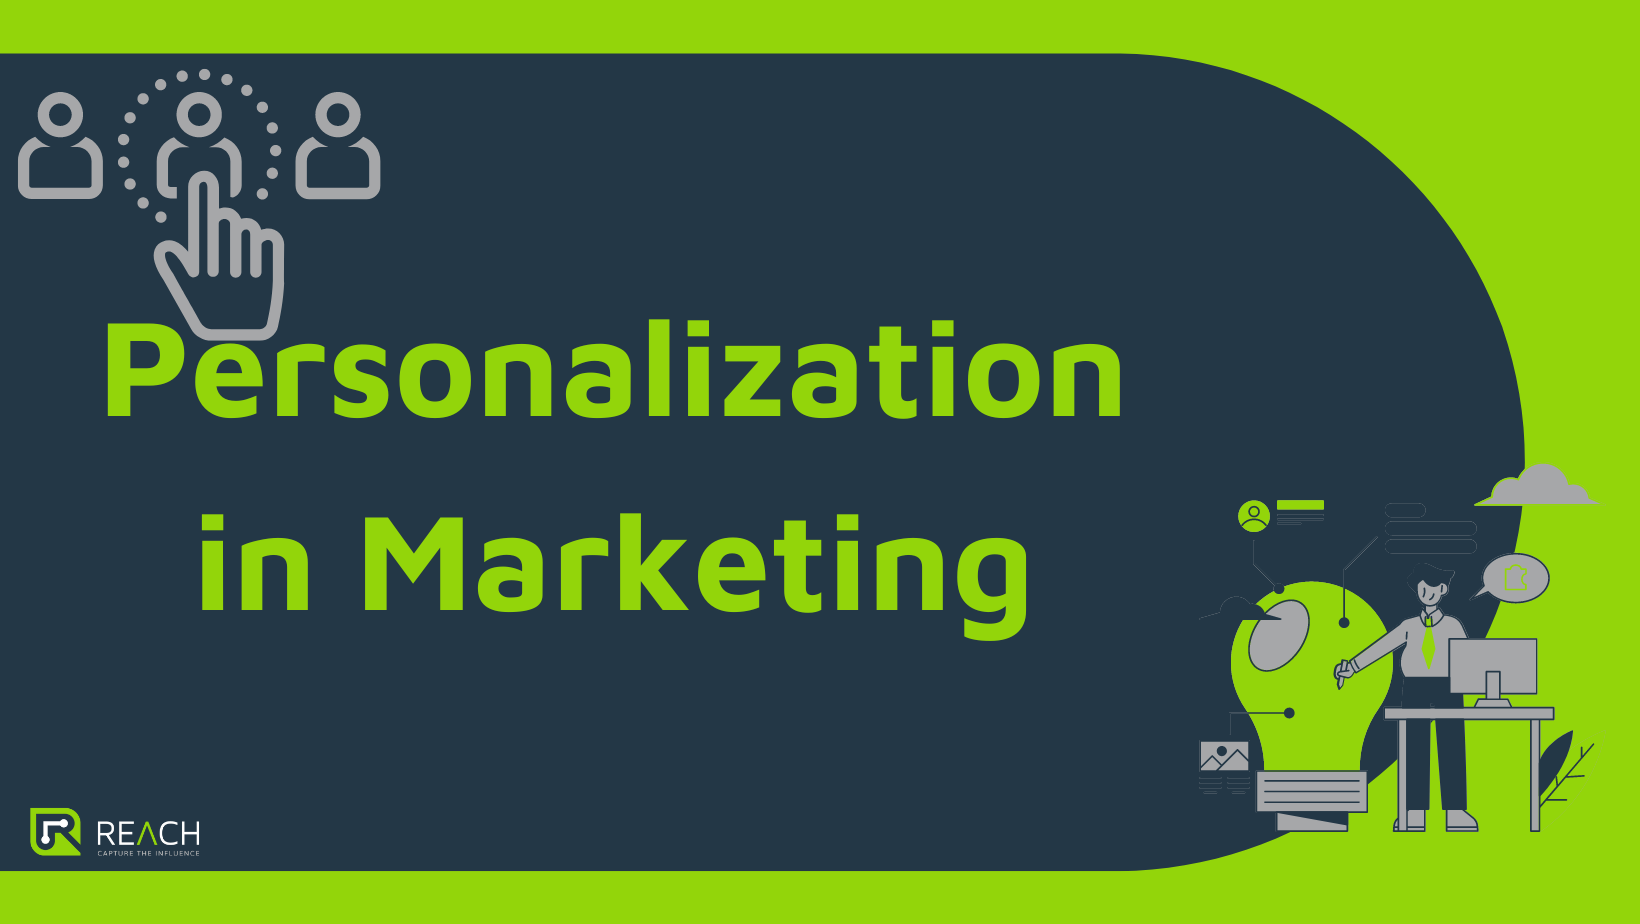 The key to winning over customers lies in personalization, which tailors marketing efforts to individual needs and preferences.